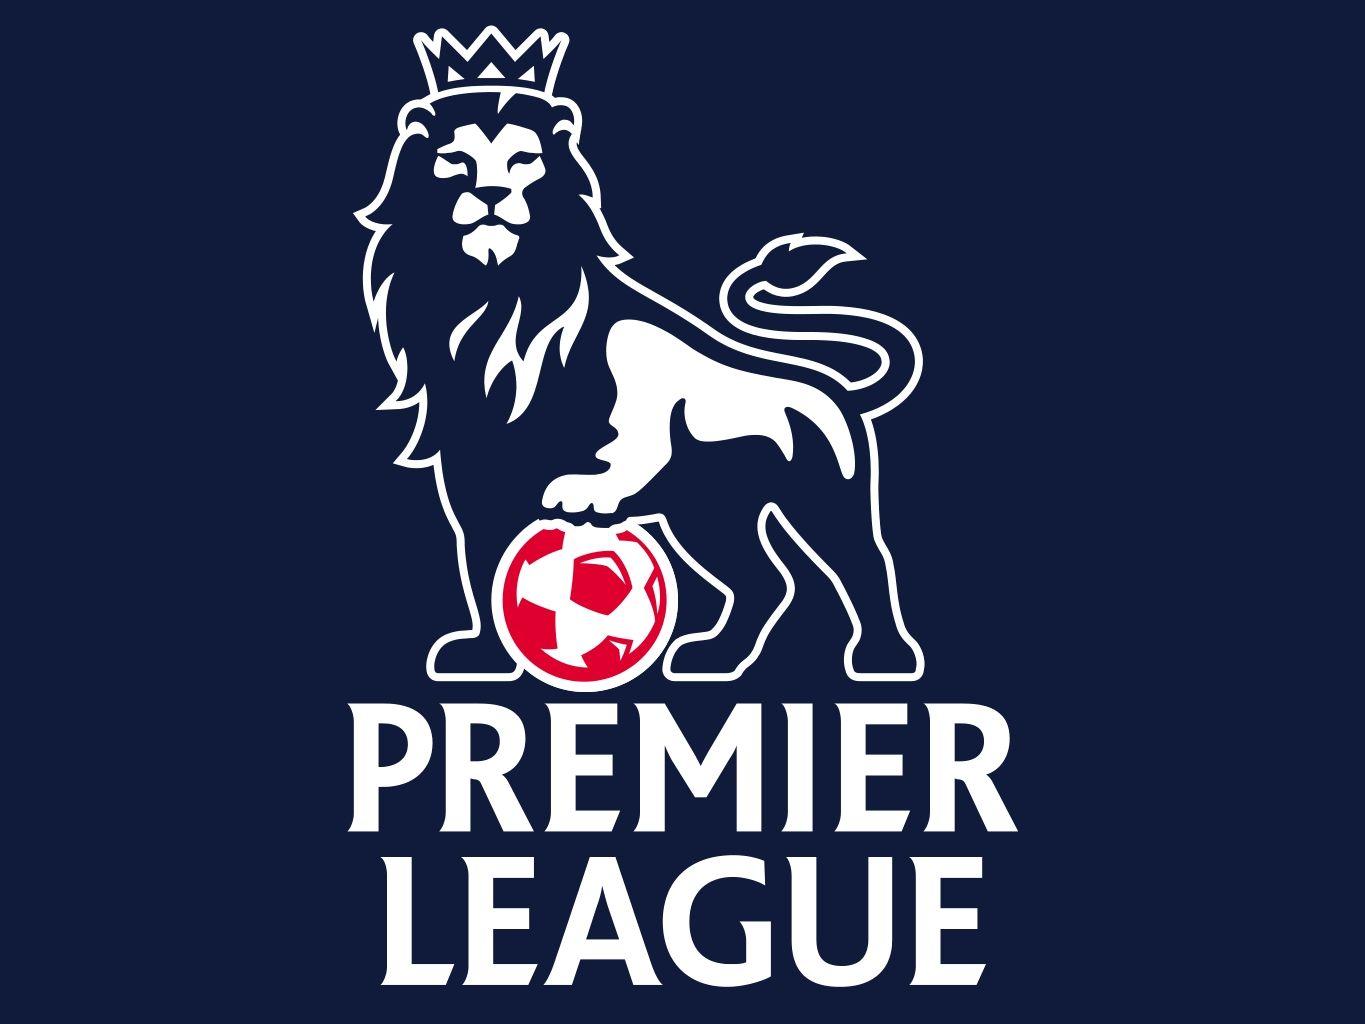 Who is the best team in Premier League table